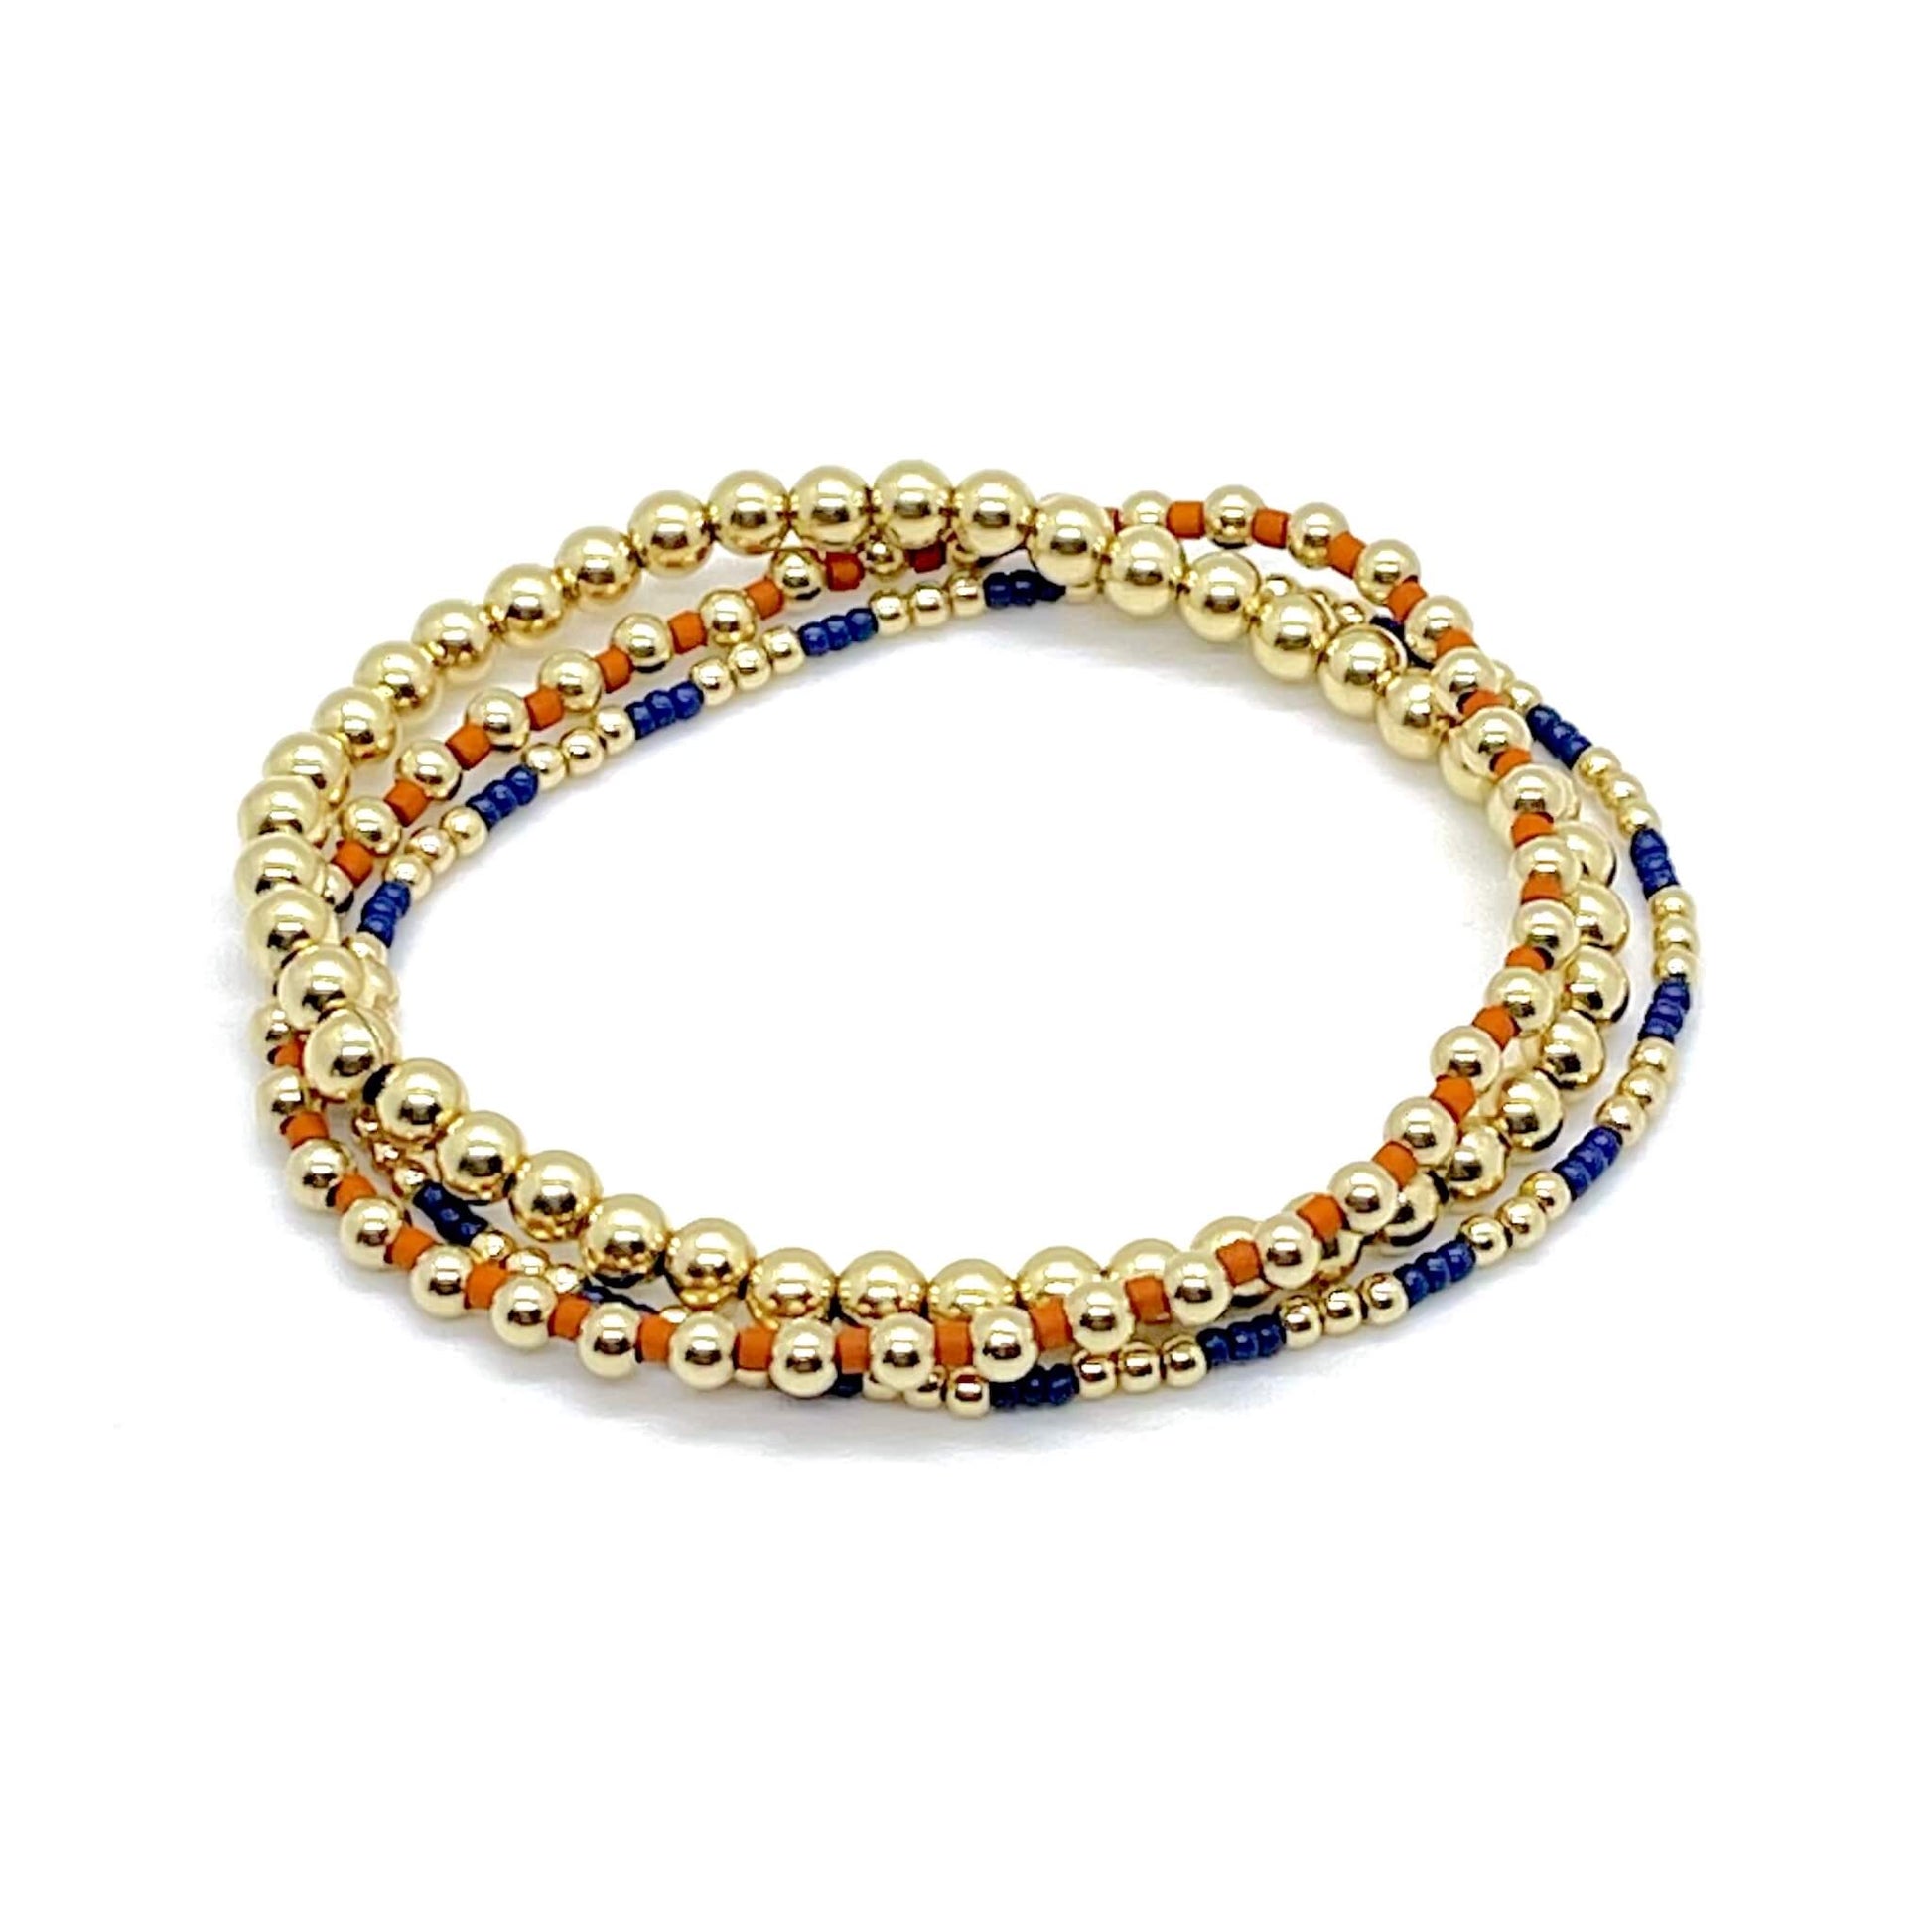 Blue, orange, and gold beaded stretch bracelets with 14k gold filled balls and glass seed beads.